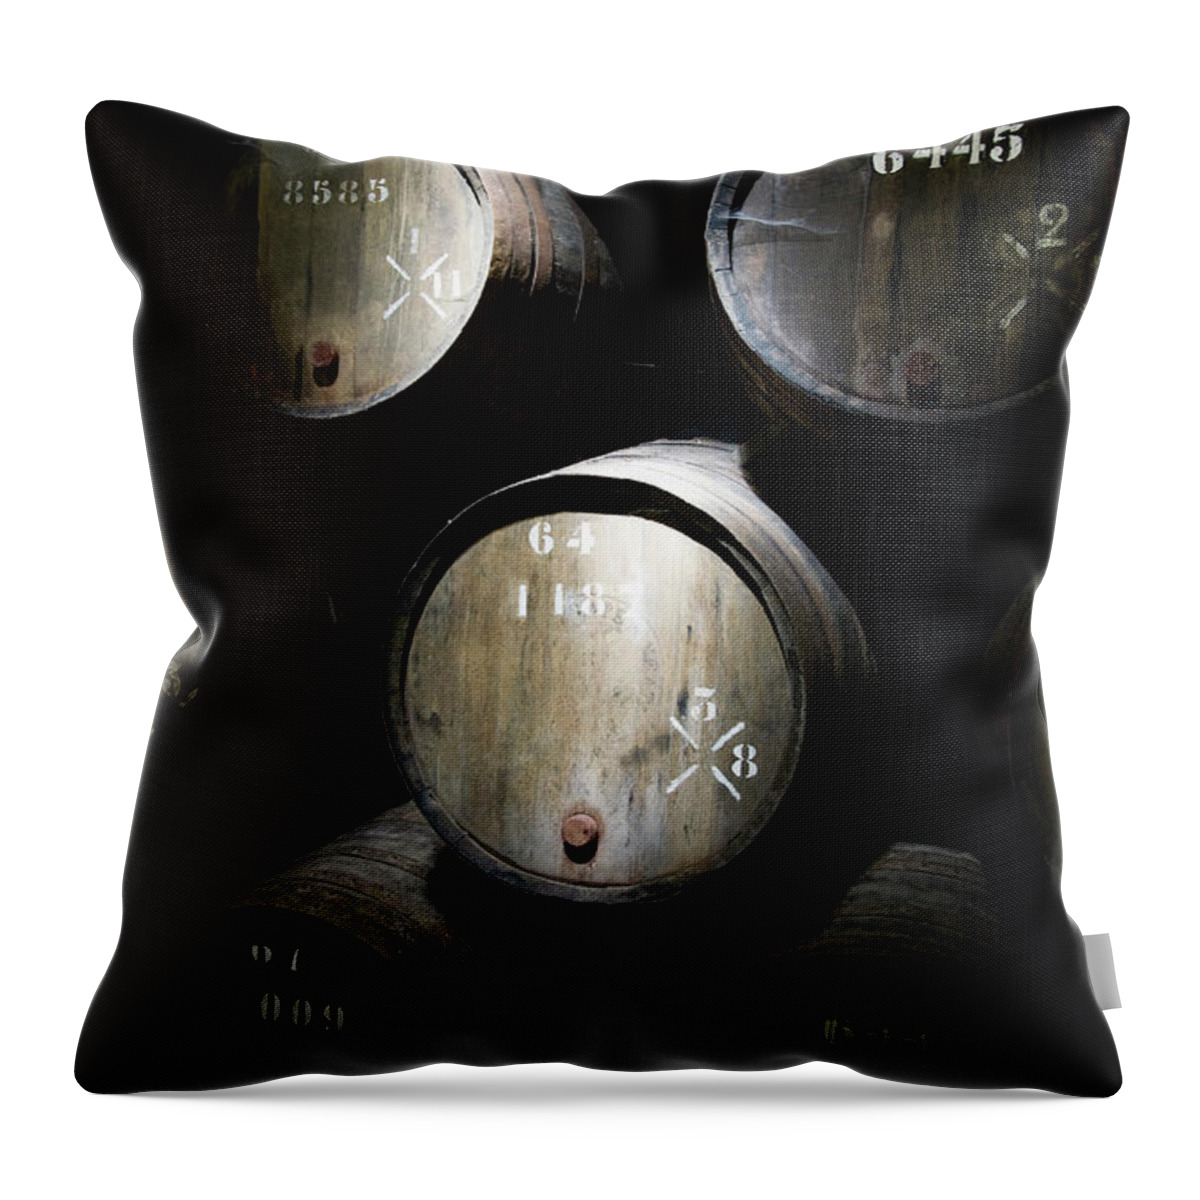 Alcohol Throw Pillow featuring the photograph Wine Barrels In A Cellar by Tobias Titz